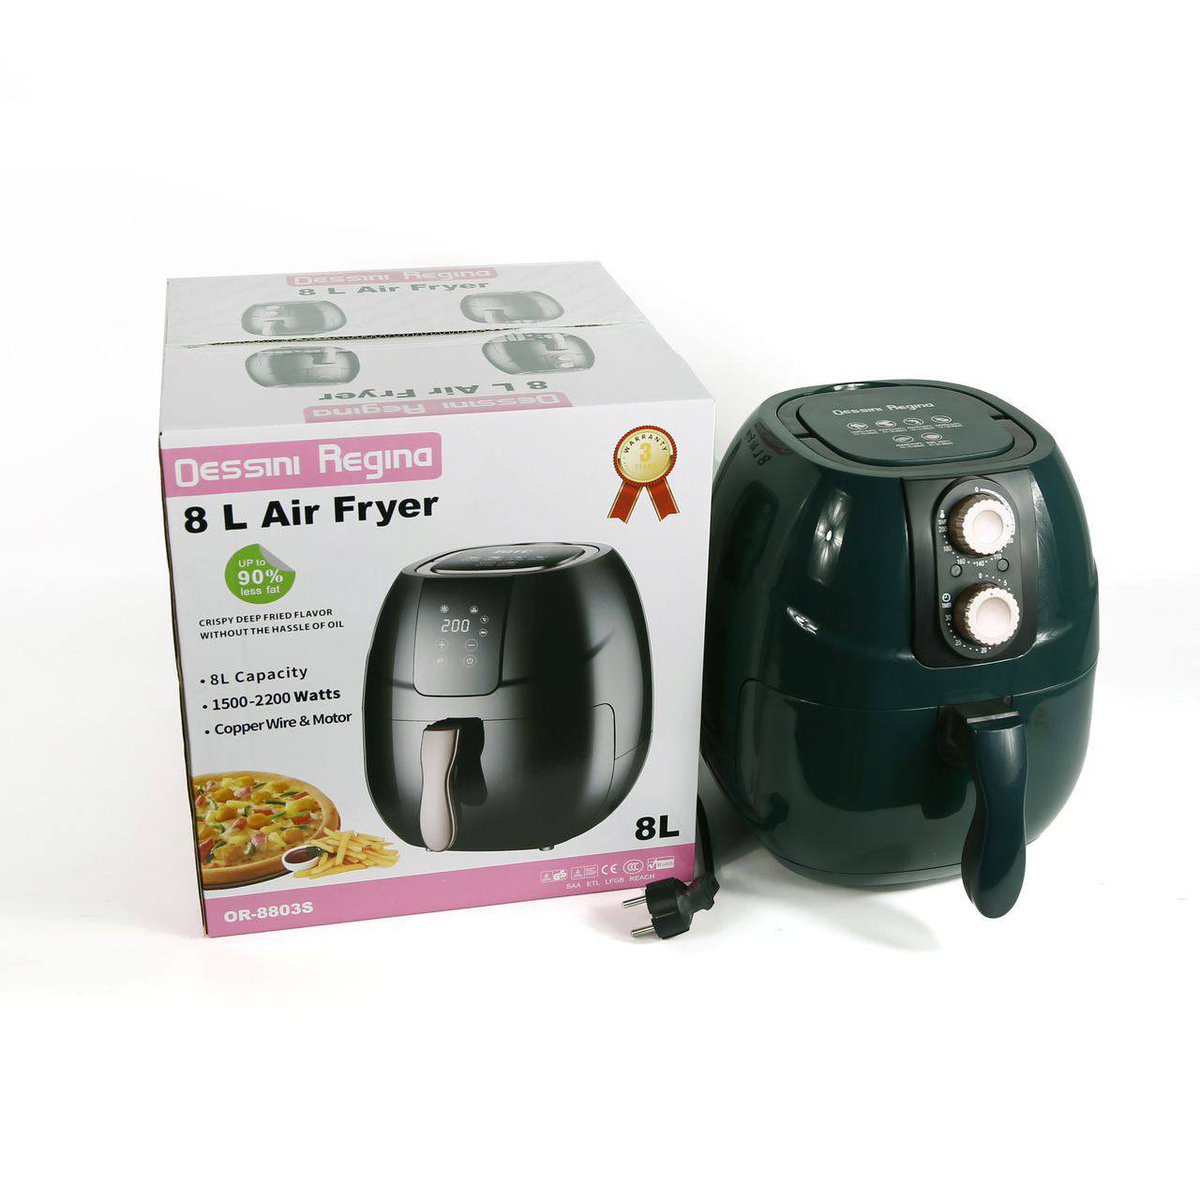 Desini air fryer 8 litres 

Price: N42,000

To order, DM
WhatsApp/Call (+2347048540500)

#souveniceng
#airfryer 
#airfryersinlagos 
#airfryerslagos 
#souvenirstore 
#souvenirstoreinlagos 
#souvenirstoresinlagos